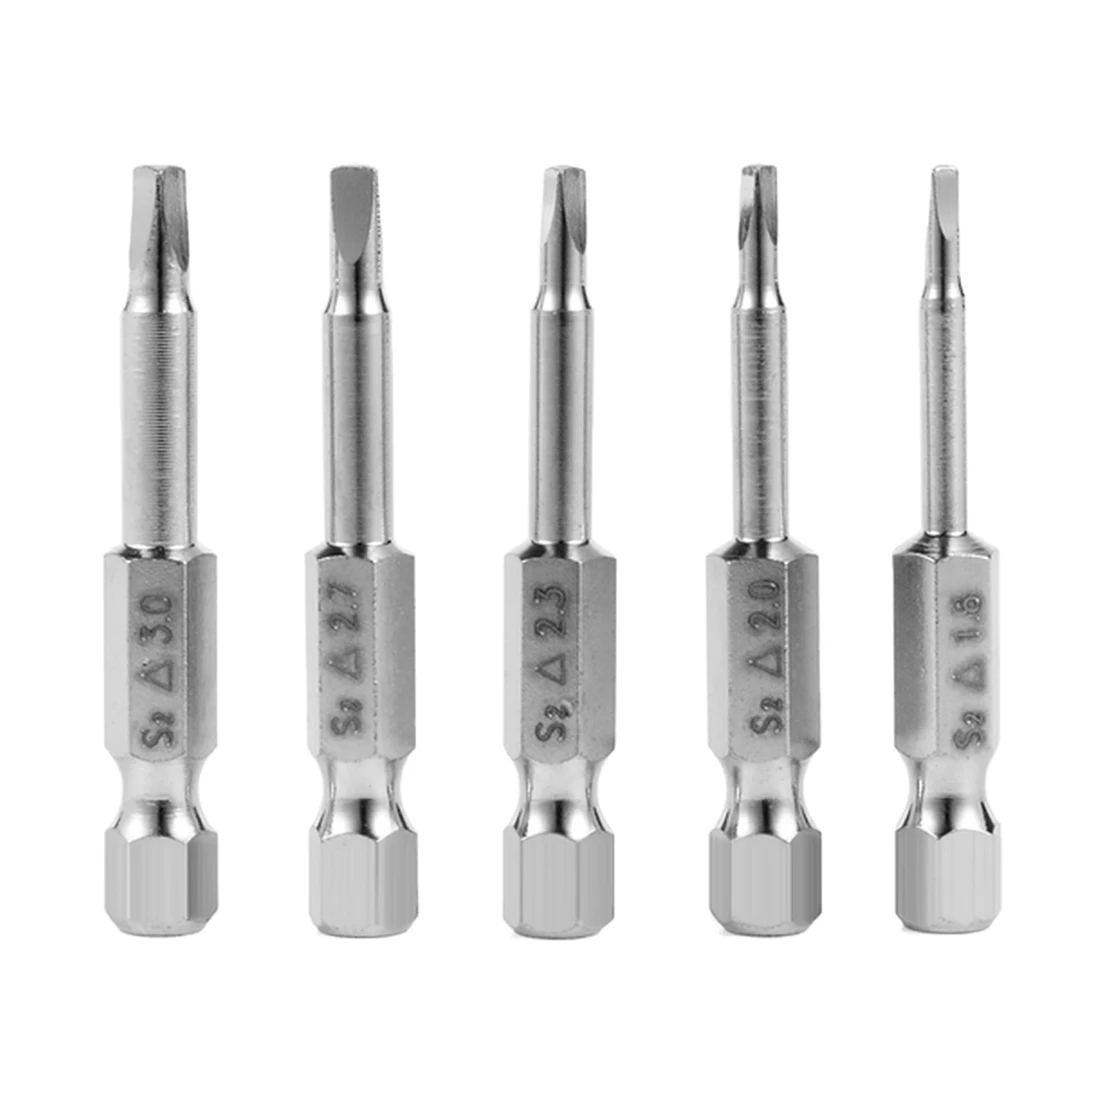 5 X Magnetic 1.8-3mm TRI Wing Security Screwdriver Bits S2 Steel 1/4" Shank Tool